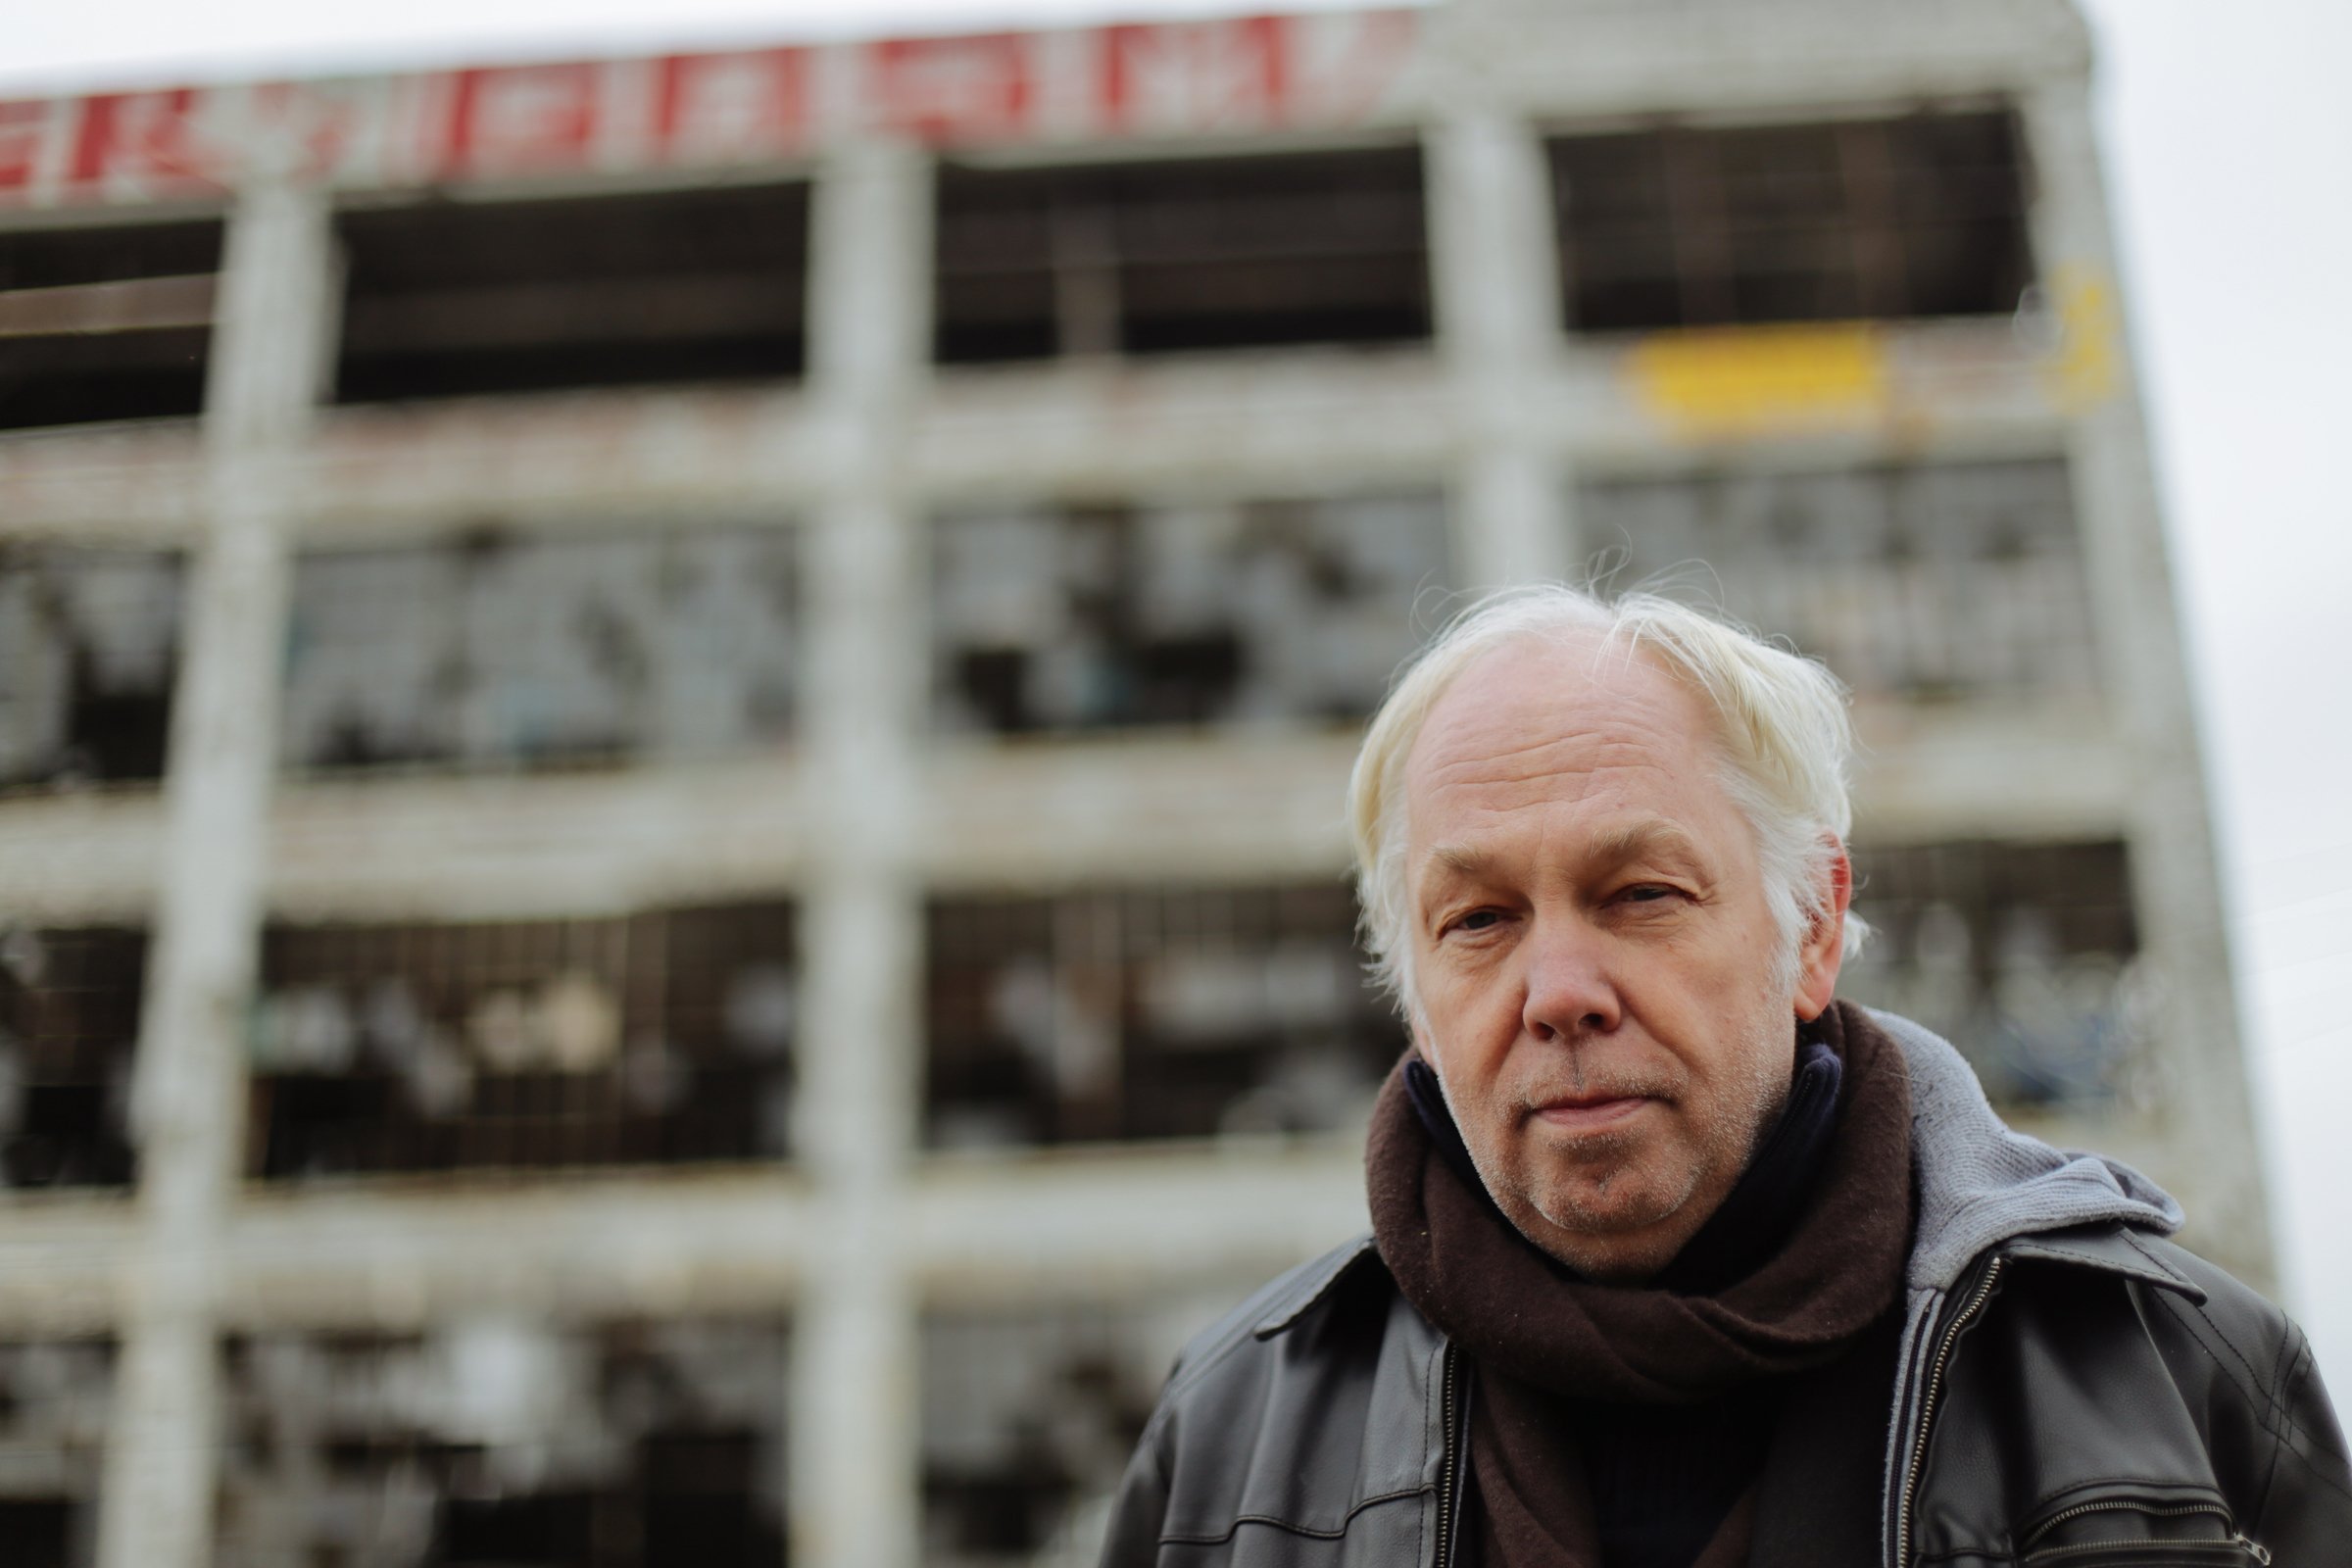 World-renowned Berlin club owner Dimitri Hegemann poses for a photo outside the vacant Fisher Body Plant No. 21 in Detroit on Wednesday November 26, 2014. Hegemann has proposed converting the building into a techno club and community center.